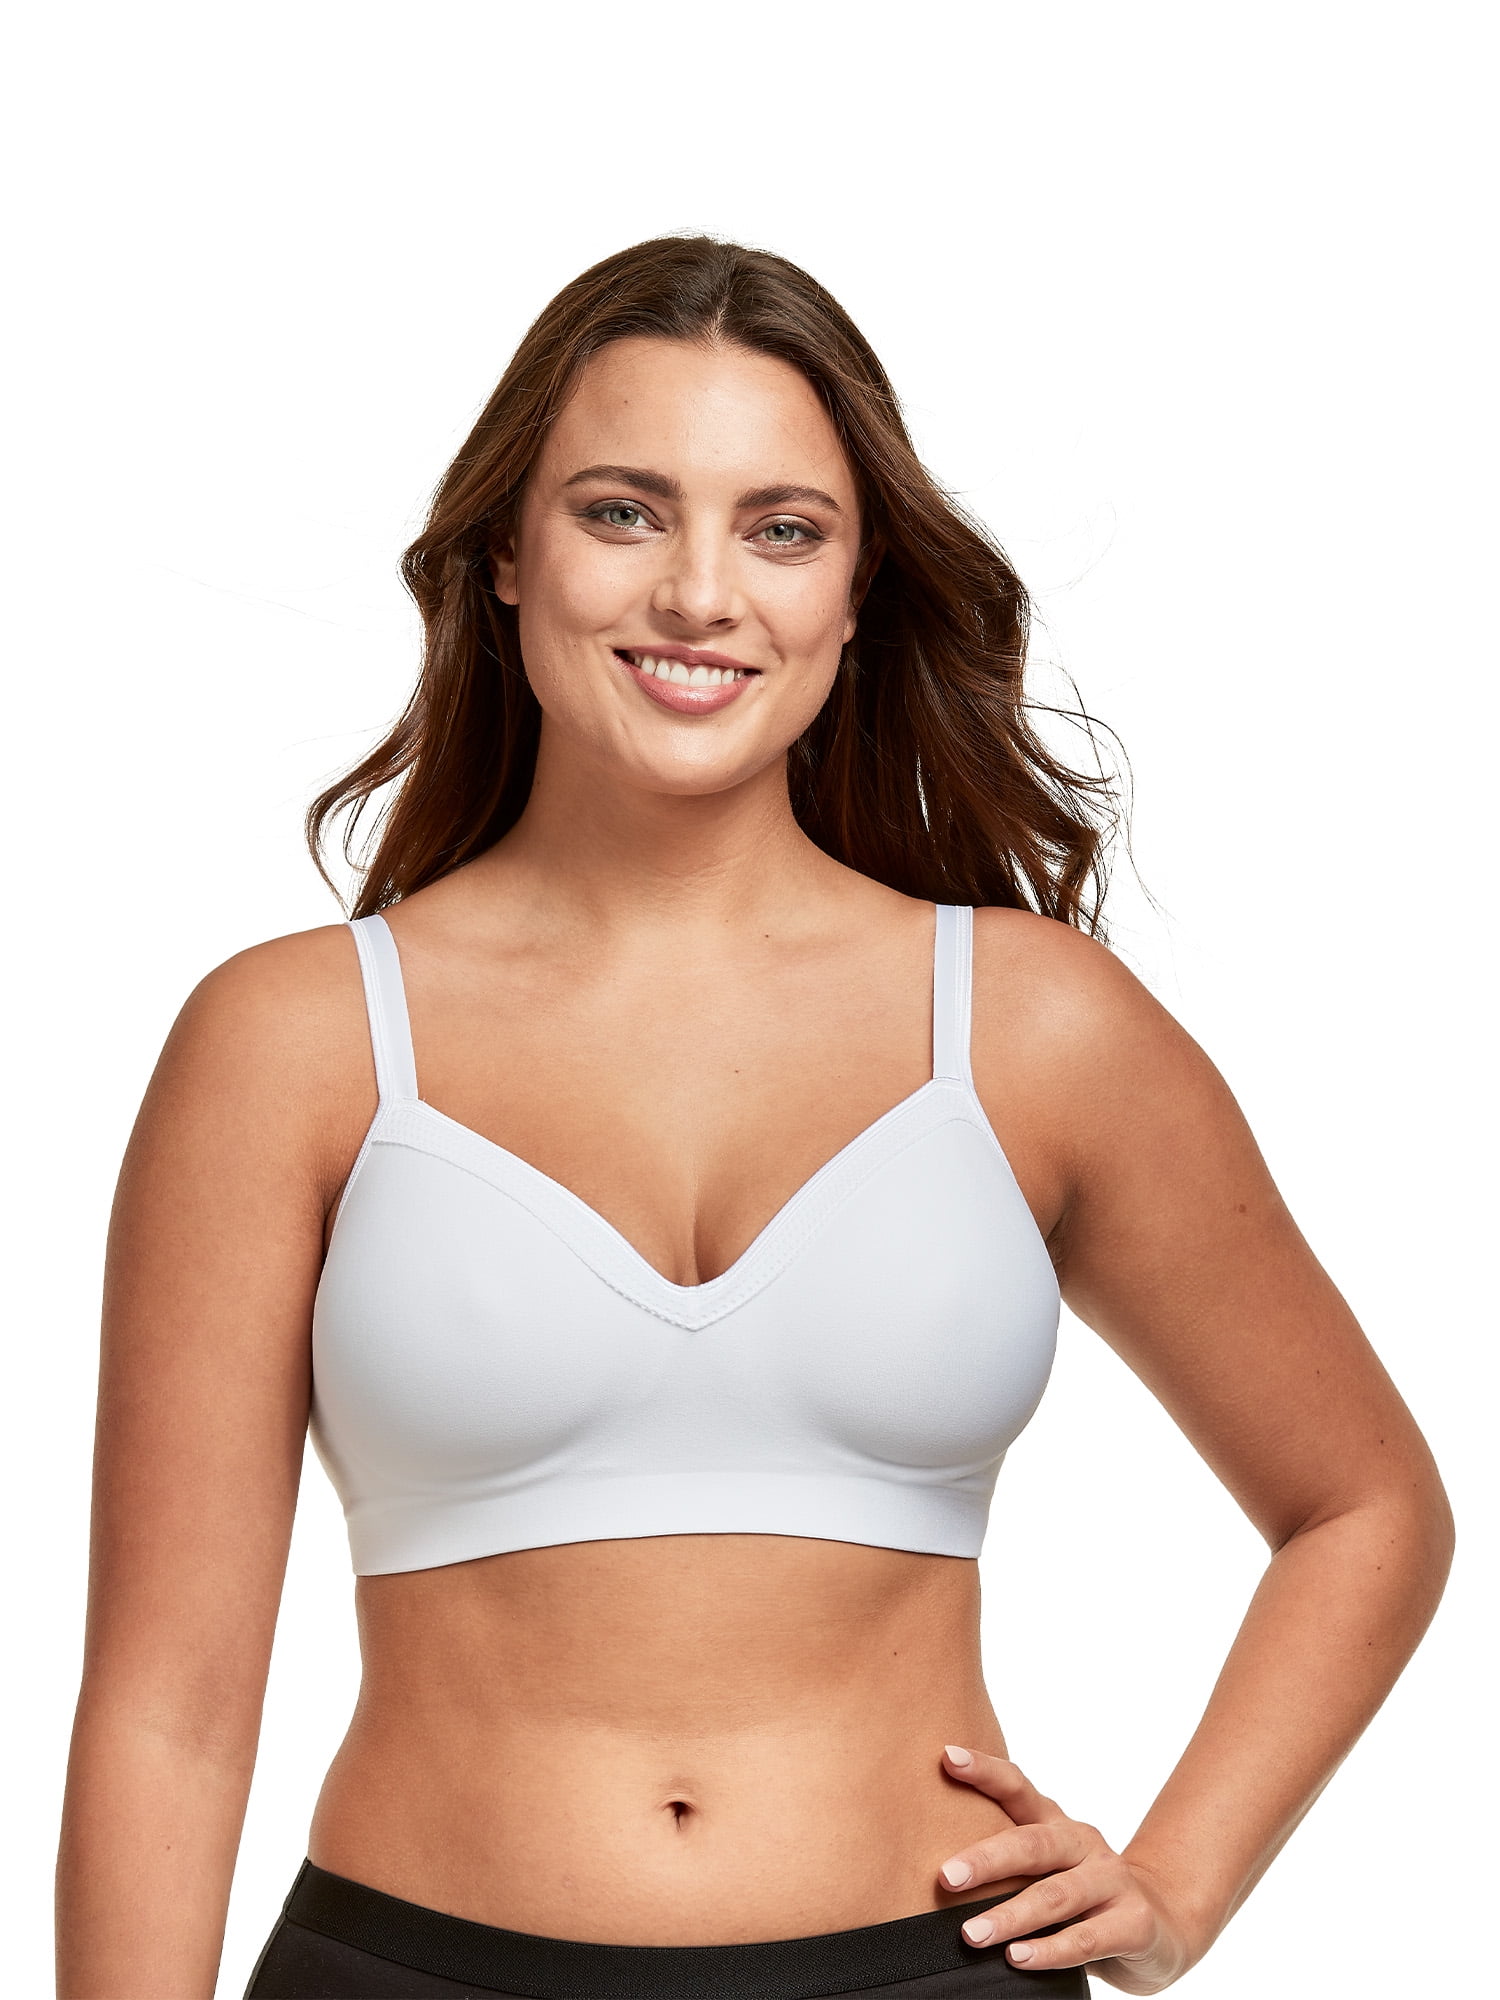 Fit for Me Women's Supportive Seamless Wirefree Bra, Style FT979